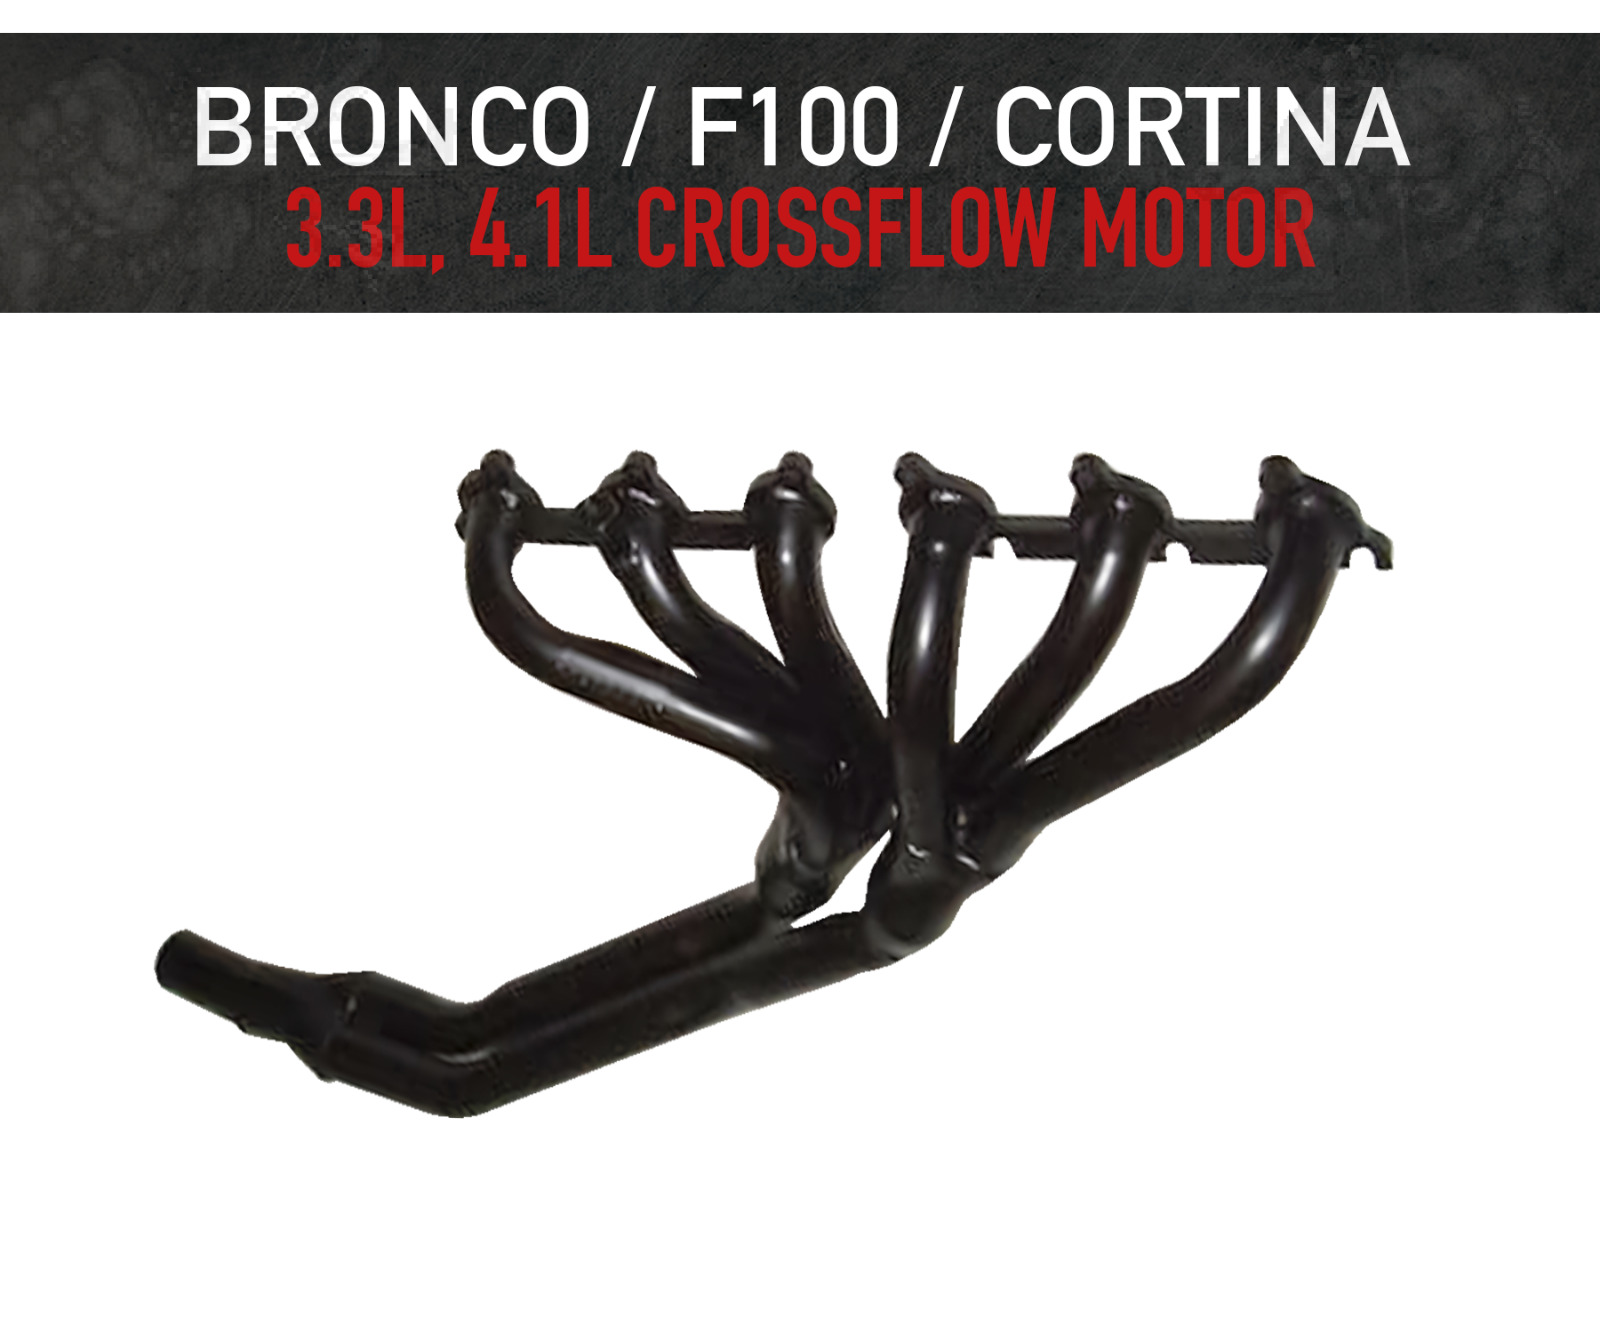 Headers / Extractors for Ford Bronco / F100 / Cortina - 3.3L & 4.1L X-Flow Motor